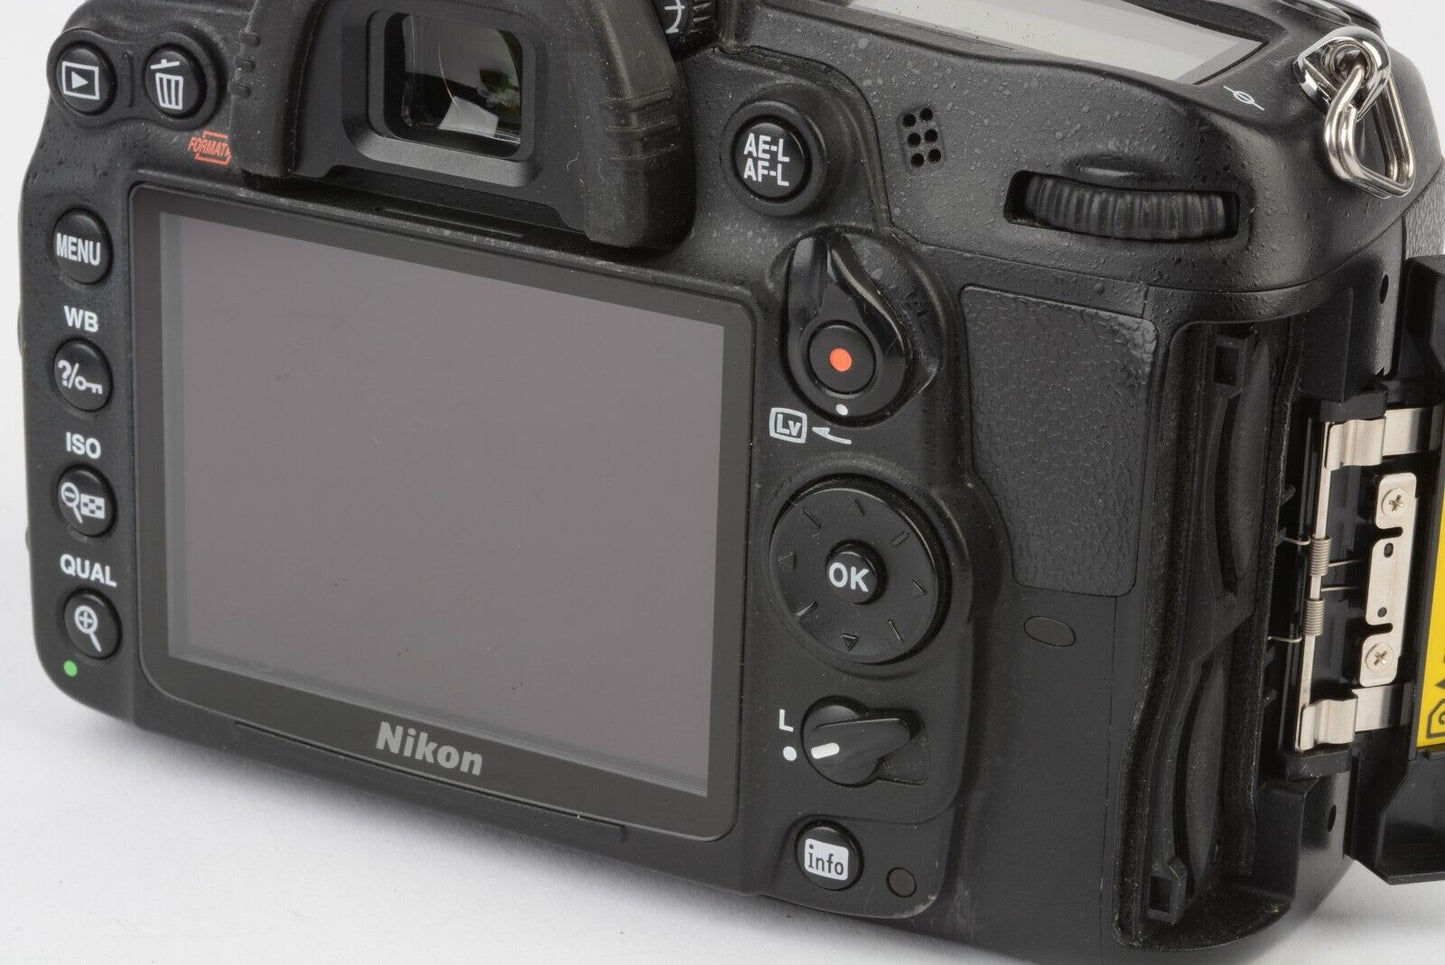 Nikon D7000 16.2MP DSLR, 2batts, charger, strap, remote, only 18,248 Acts!